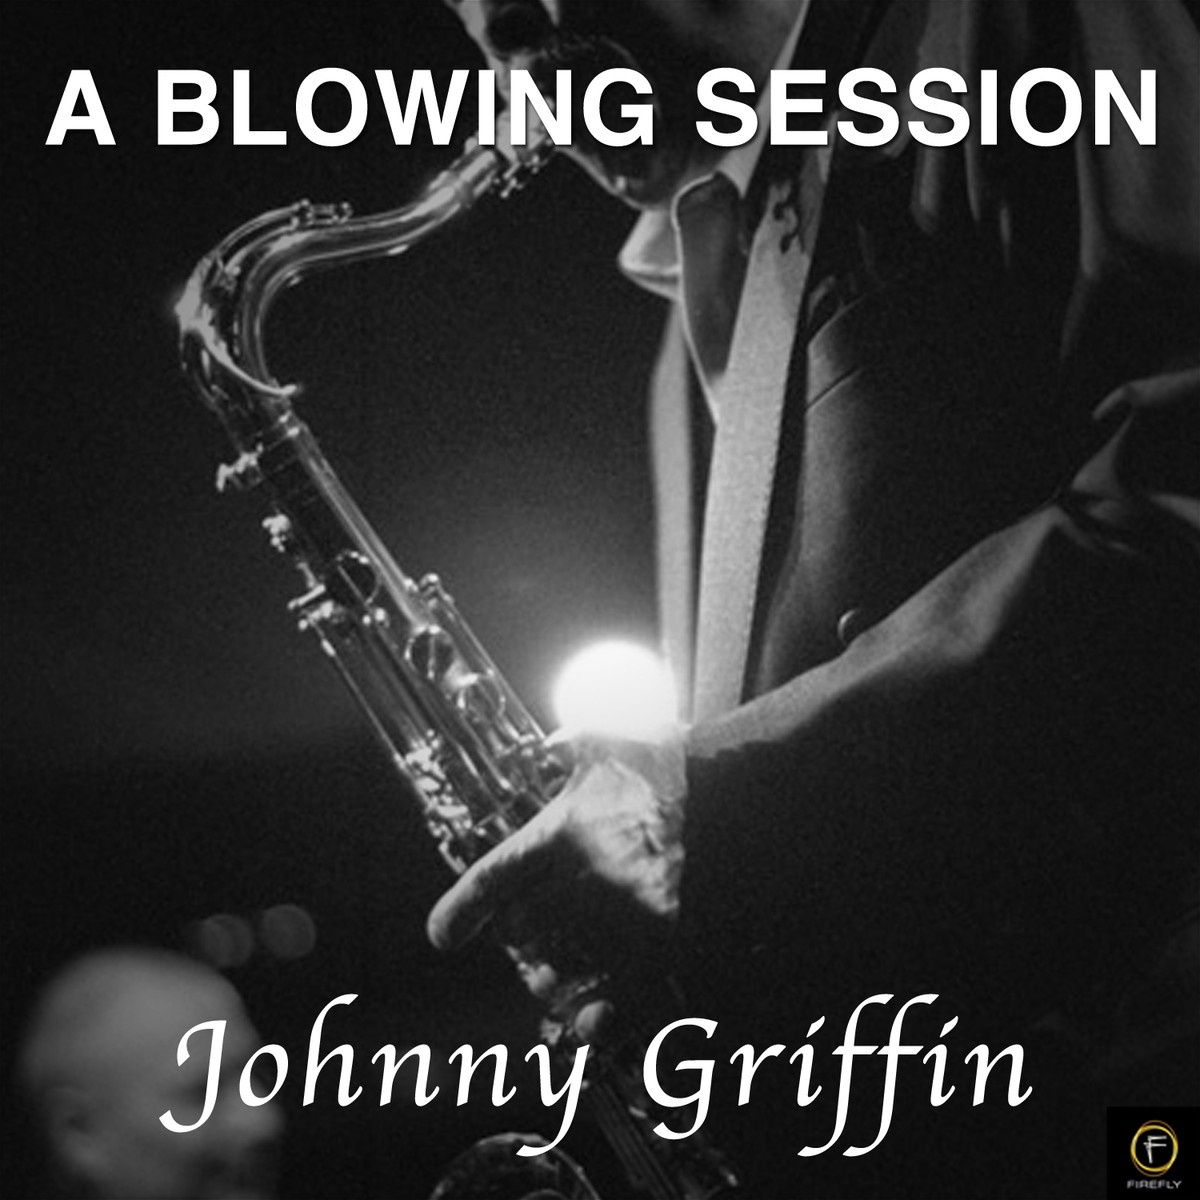 A Blowing Session (The Rudy Van Gelder Edition)